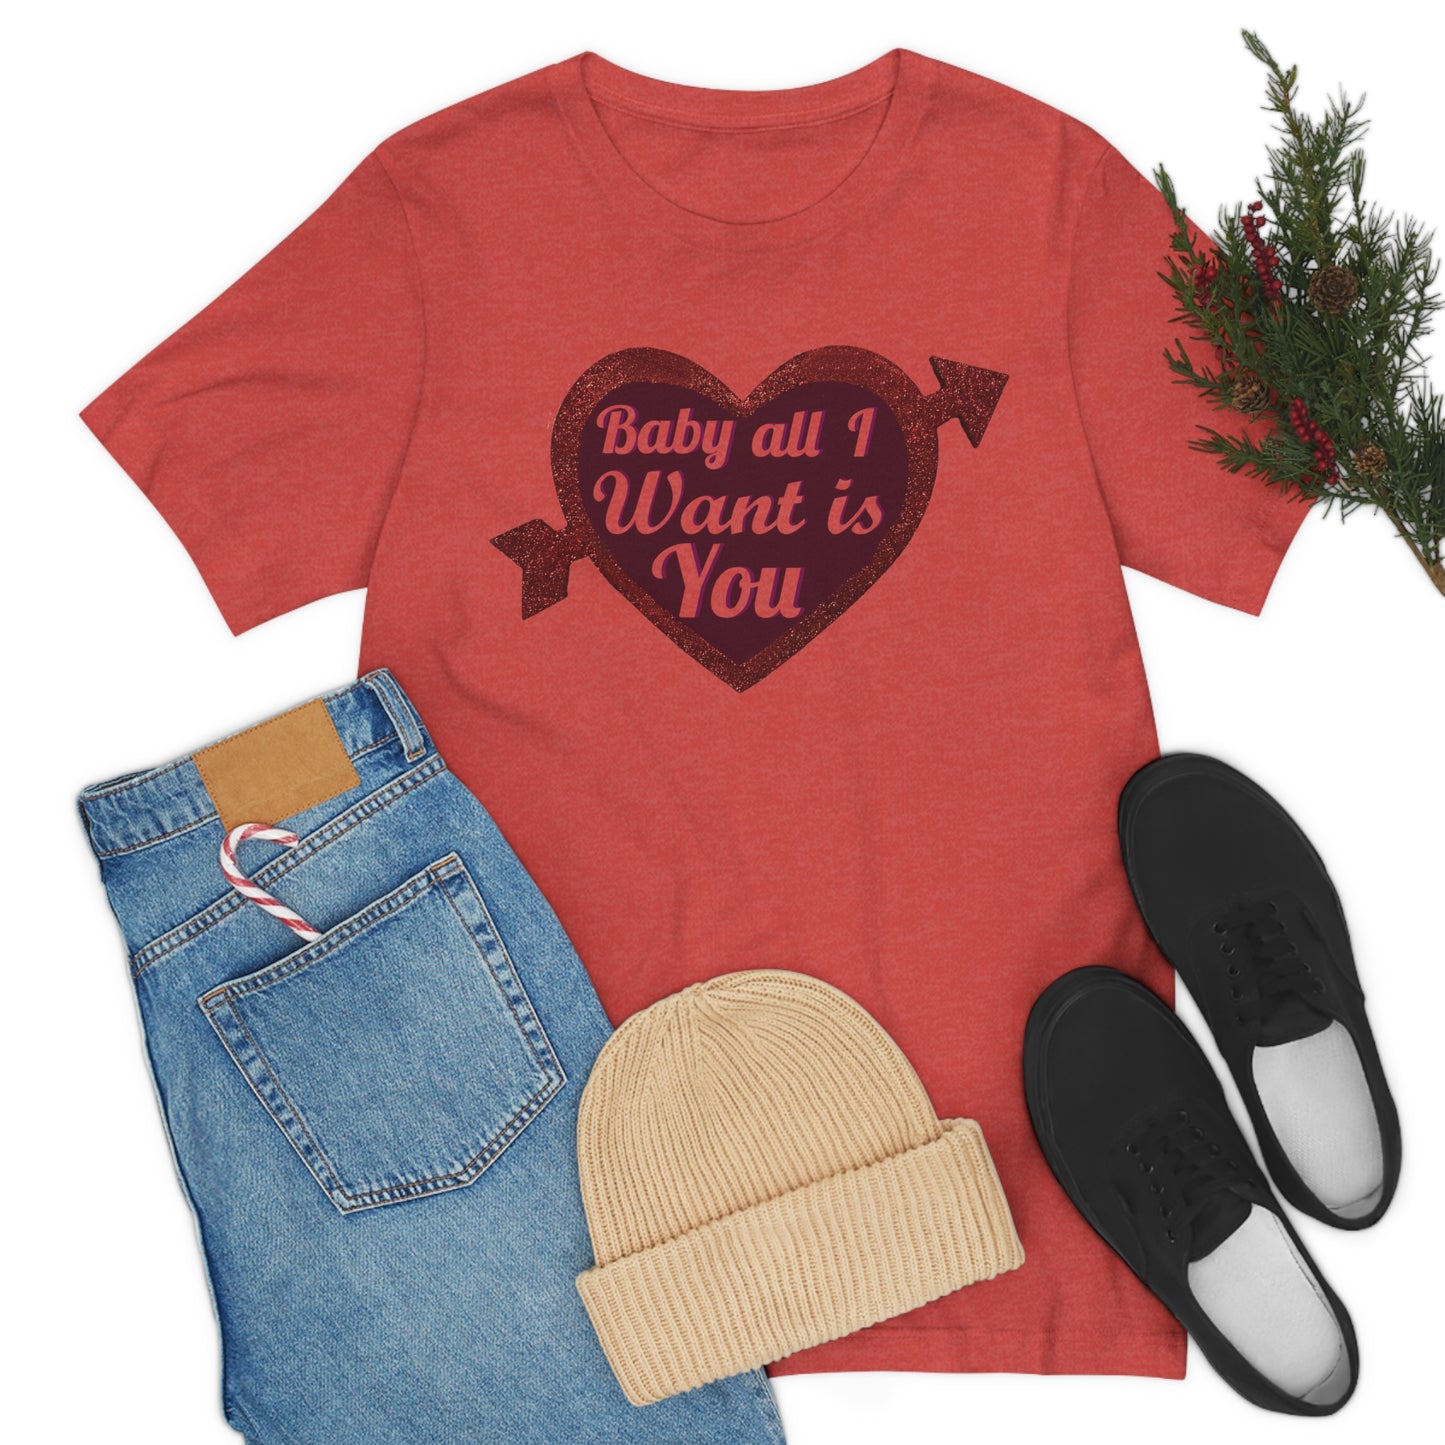 Baby all I want is You Tee